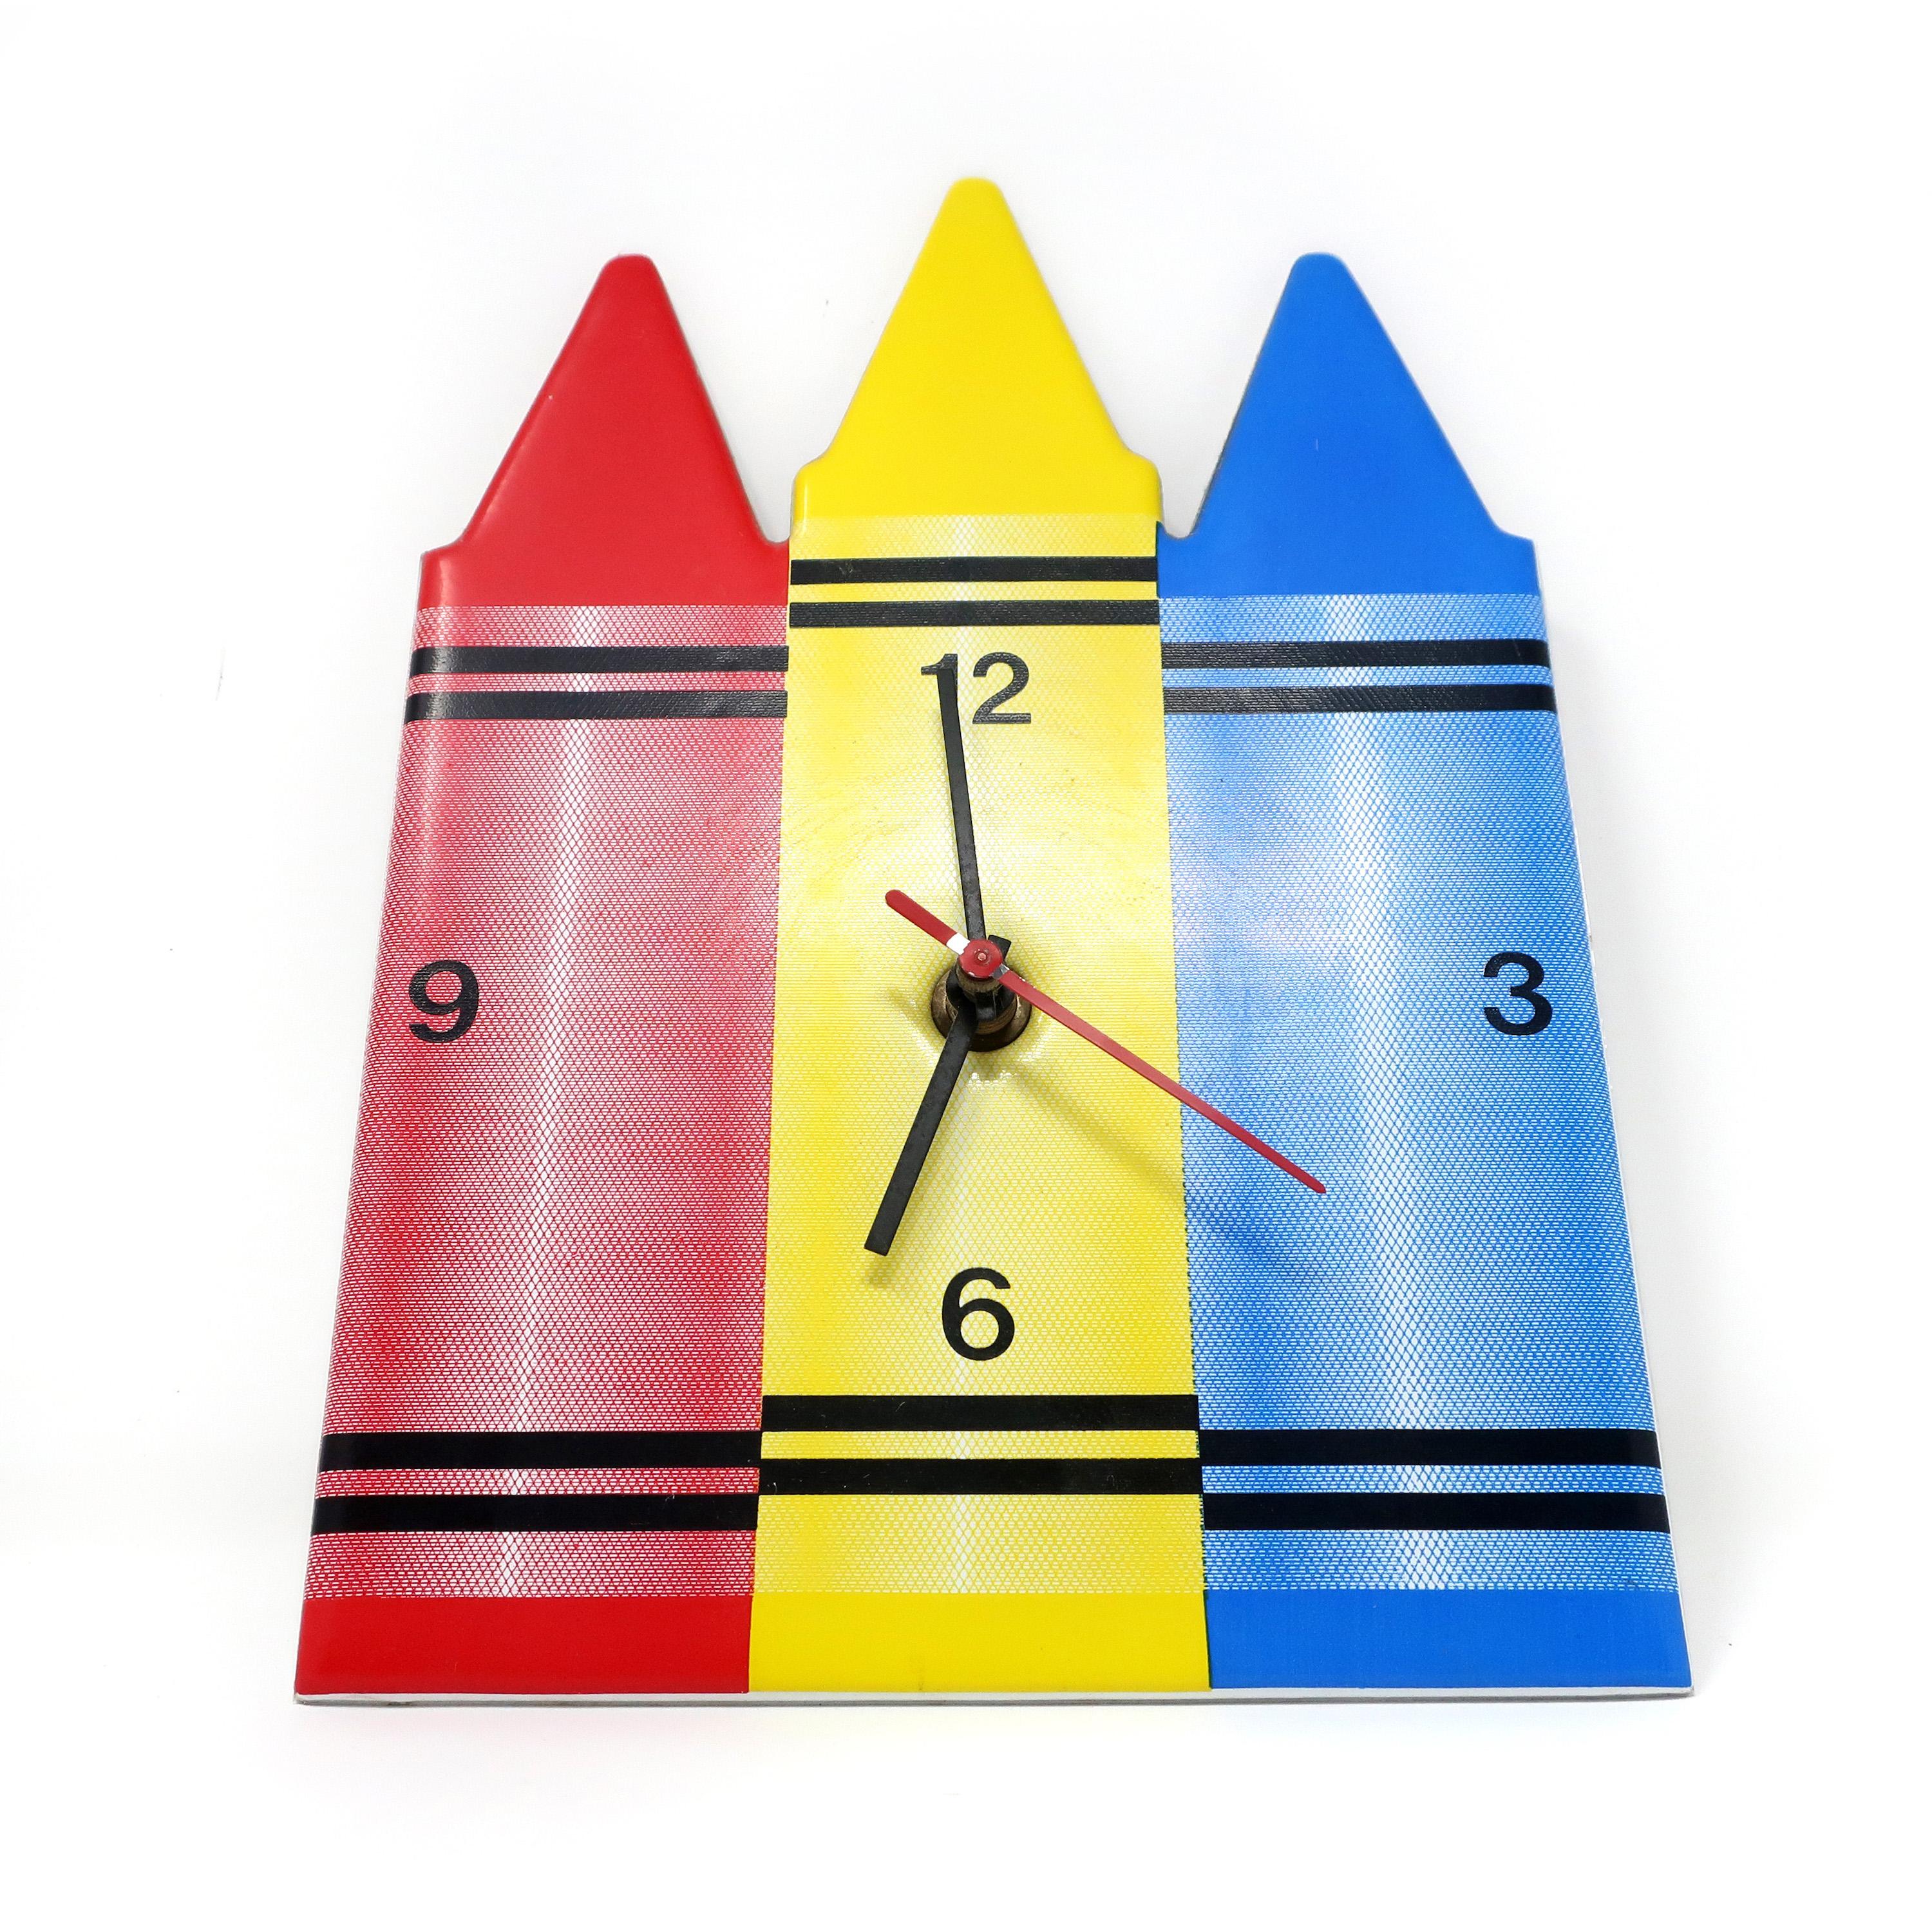 A vintage 1980s wall clock in the shape of multi-colored crayons by Small World Greetings. Three crayons: one red, one blue, and one yellow. In very good vintage condition with wear consistent with age and use, including two small paint loss spots